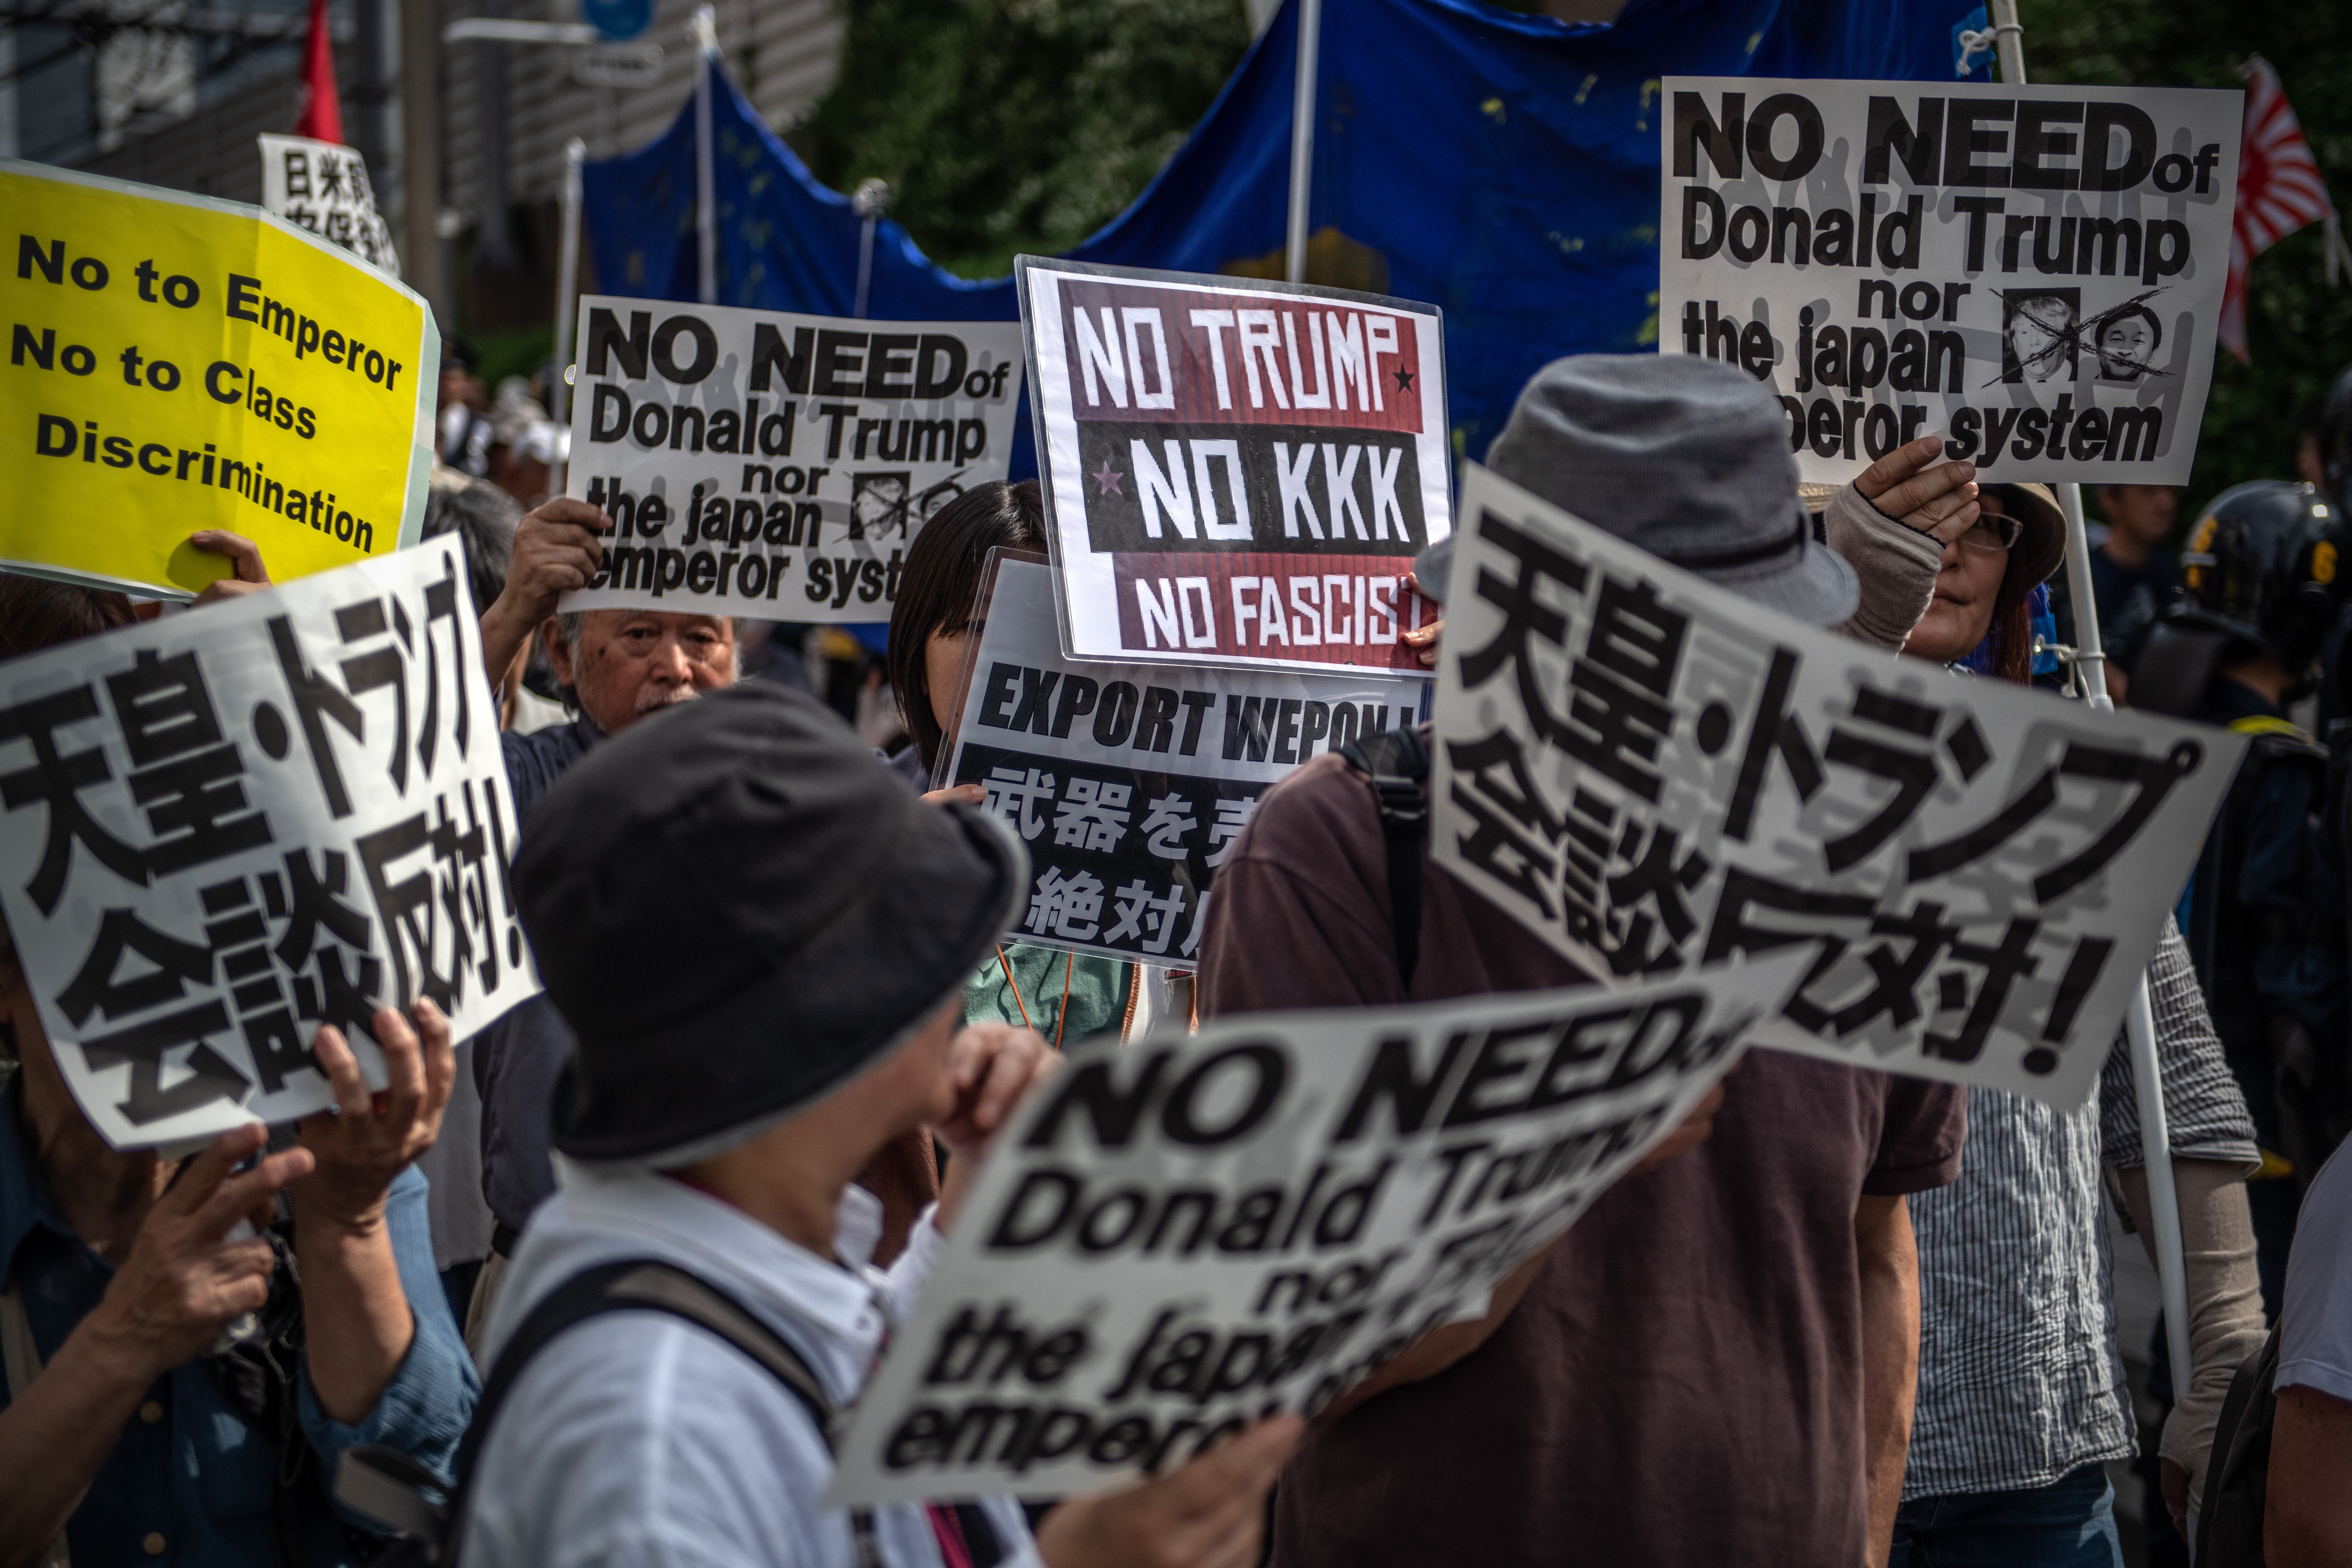 Demonstrators protest Japan's monarchy and Trump in Tokyo.